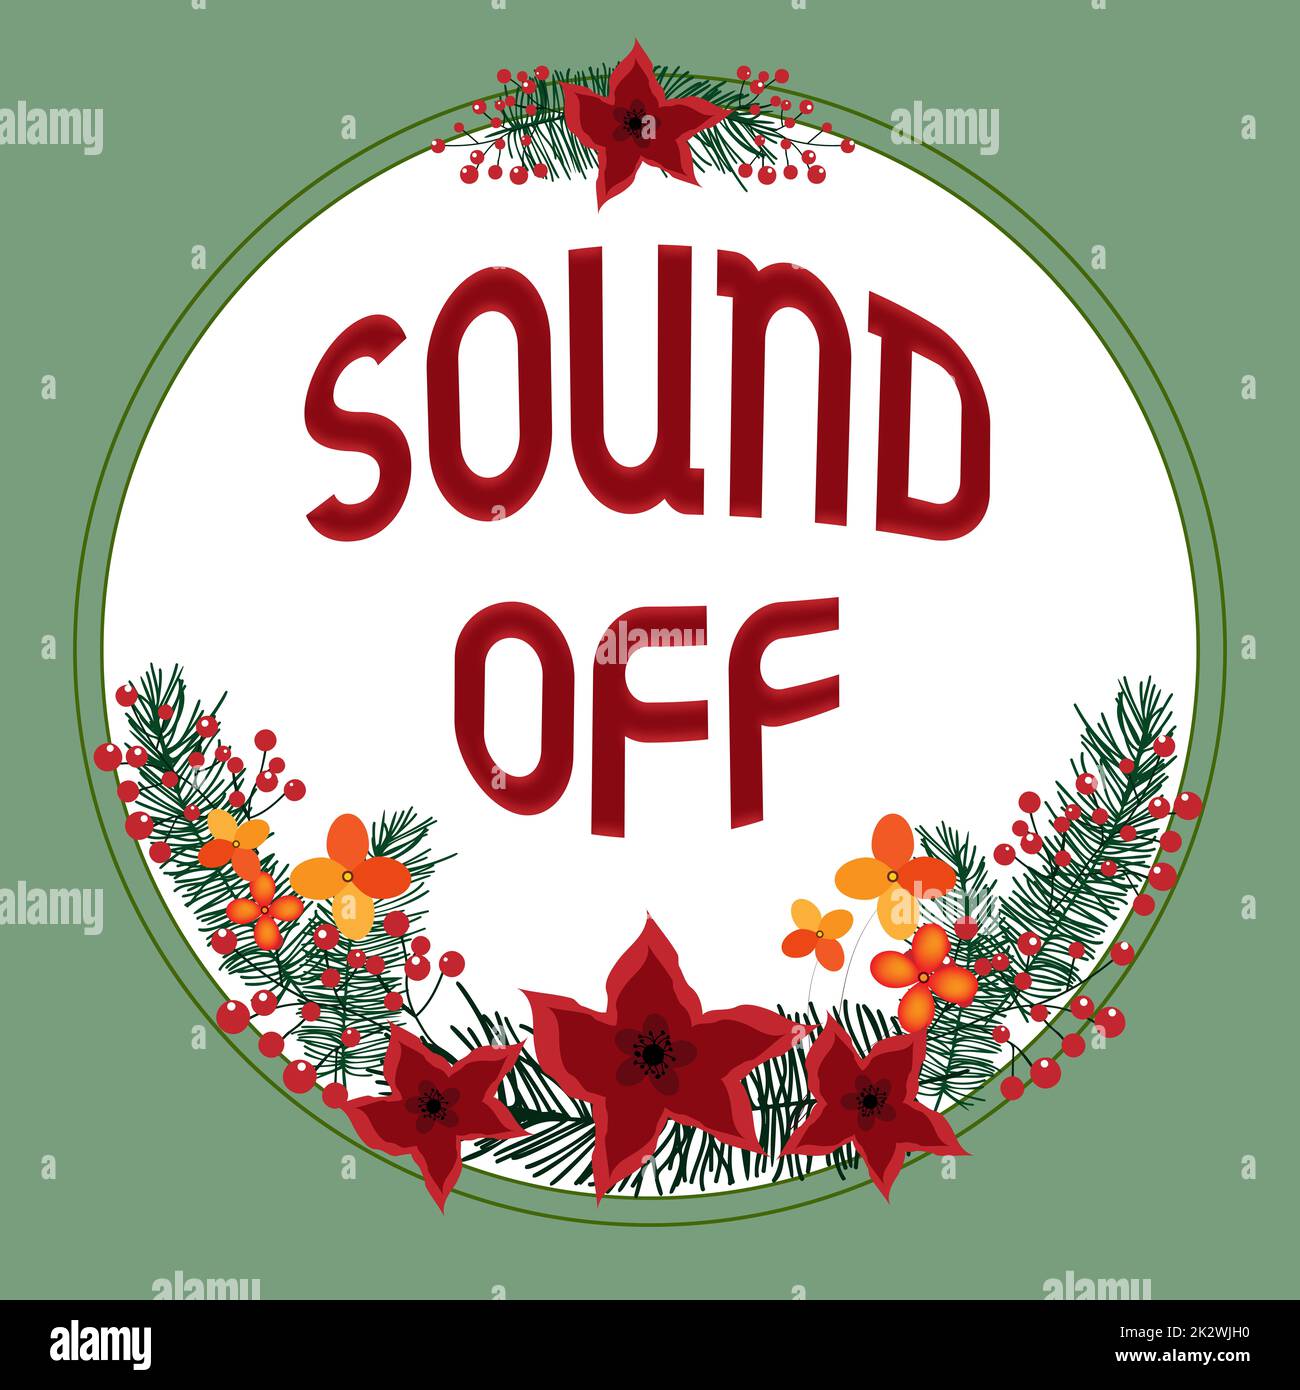 Text sign showing Sound Off. Concept meaning To not hear any kind of sensation produced by stimulation Blank Frame Decorated With Abstract Modernized Forms Flowers And Foliage. Stock Photo